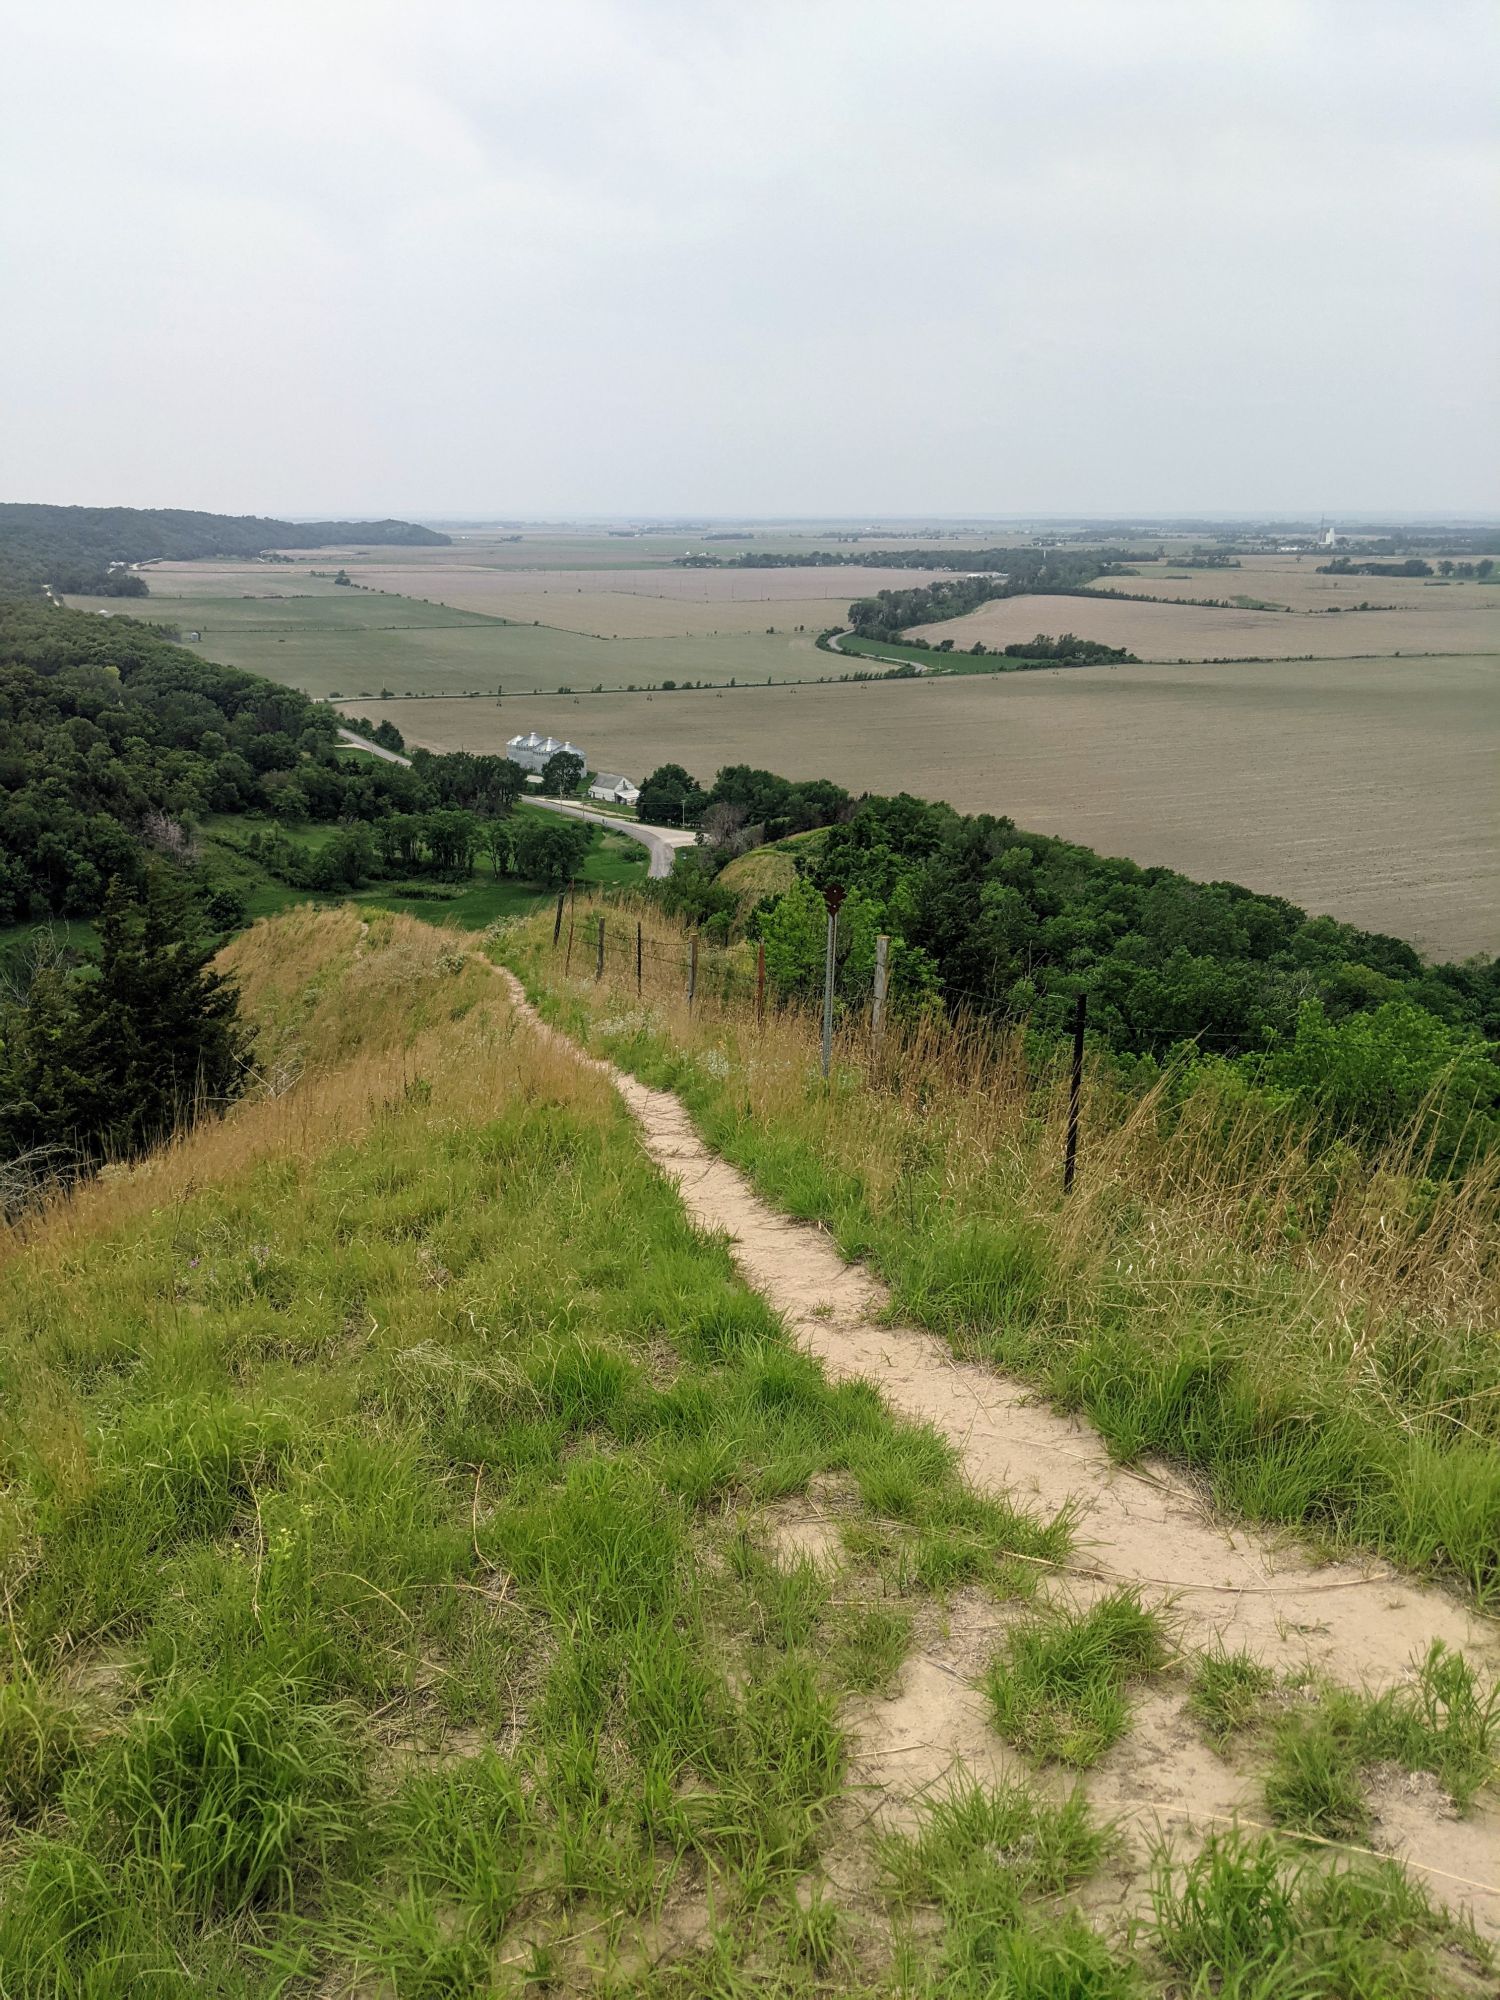 The breath-taking view from Murray Hill, after a steep climb in the Loess Hills of western Iowa.